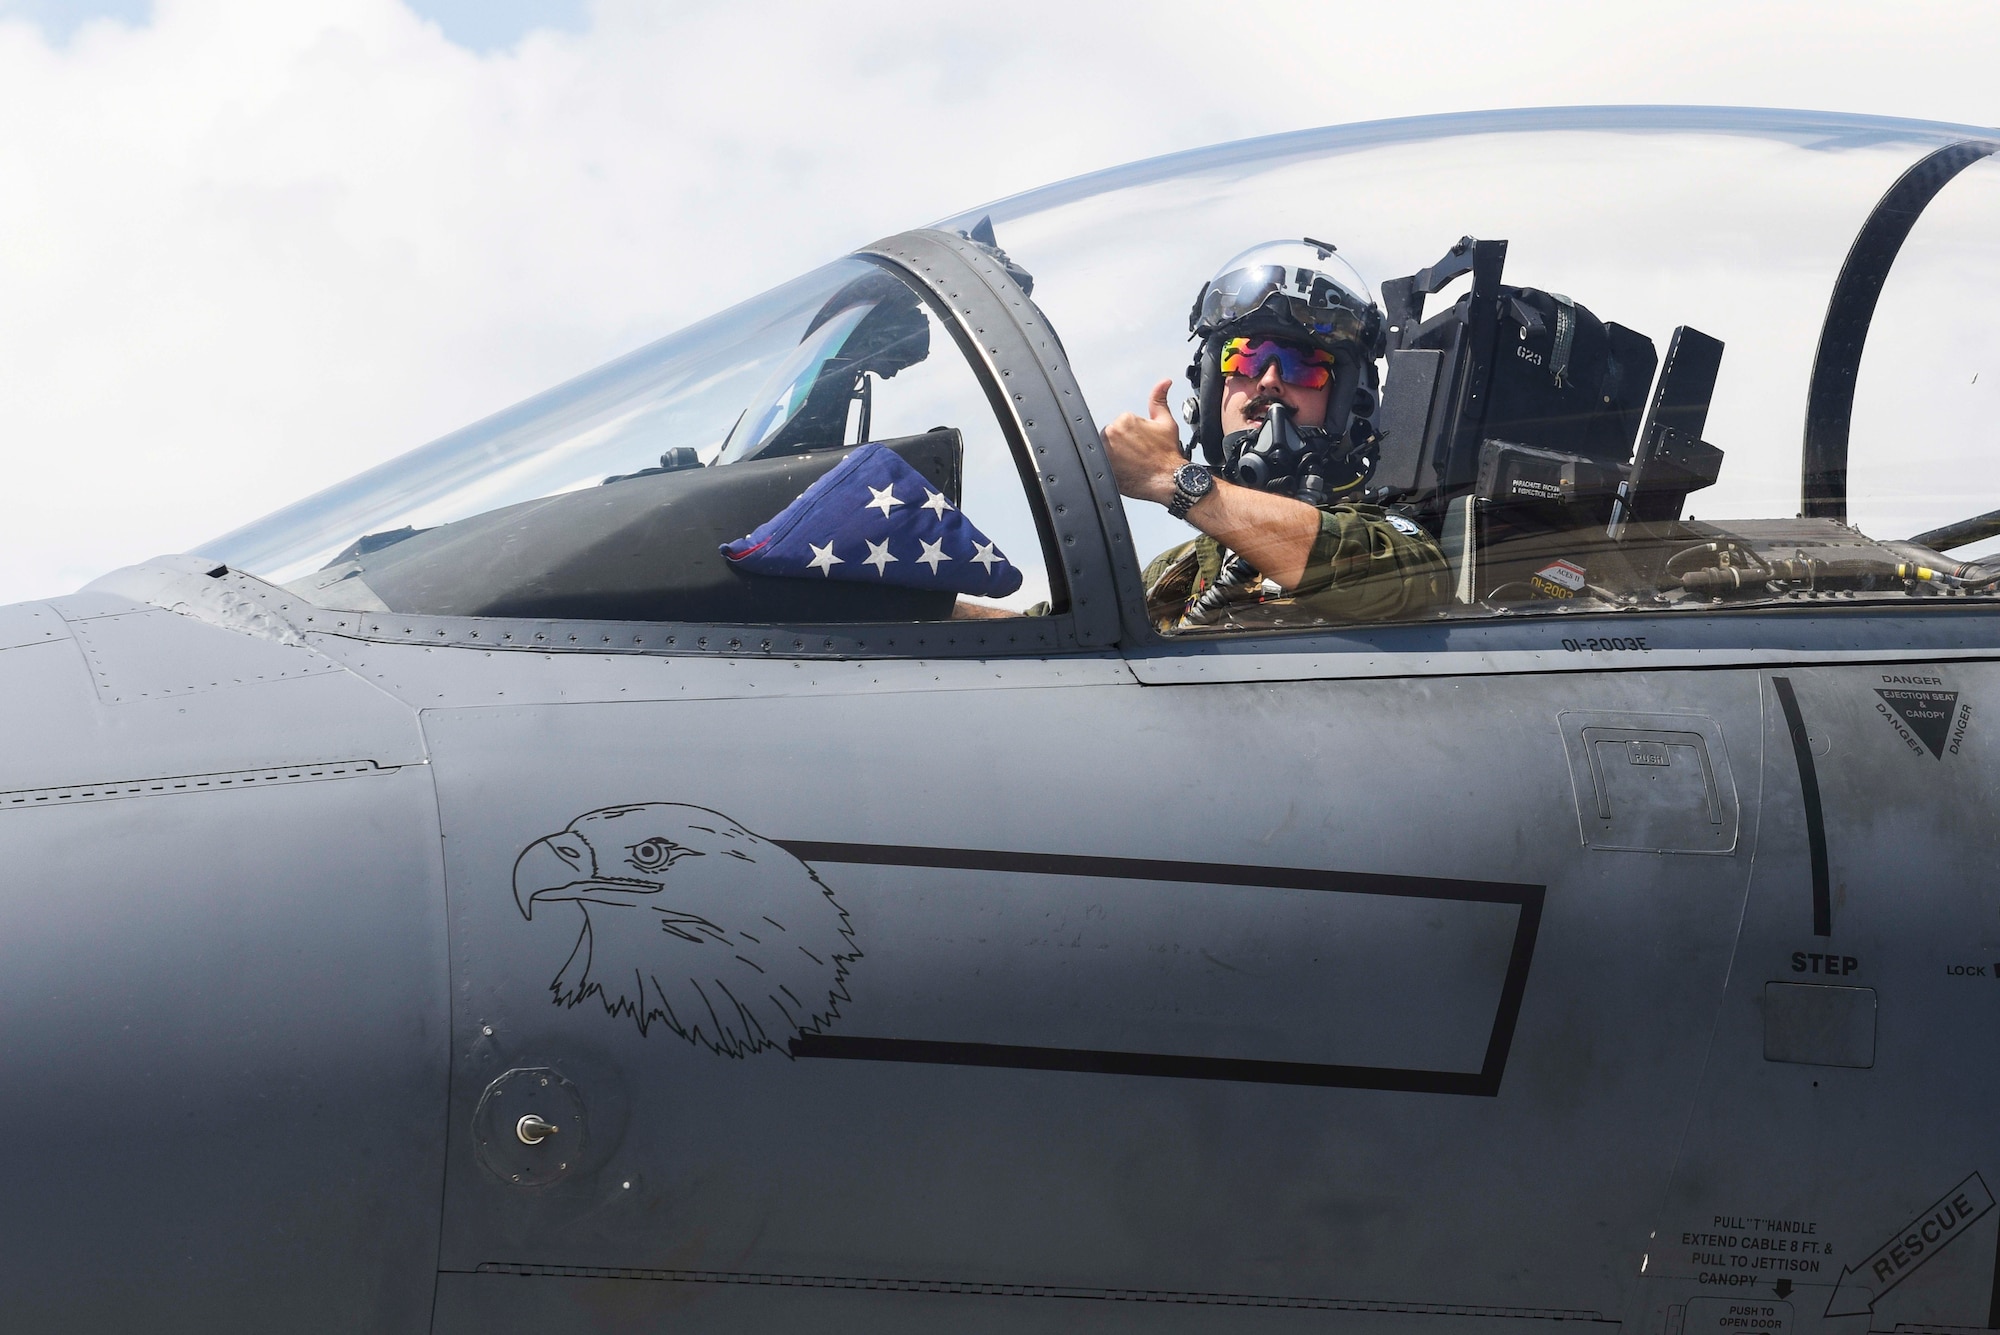 Capt. Andrew Schloemer, 494th Fighter Squadron F-15E Strike Eagle pilot, gives a thumbs-up prior to taxiing to the runway during Exercise Anatolian Eagle 2019 June 17, 2019, from Third Main Jet Base, Konya, Turkey. During the exercise, Airmen from Royal Air Force Lakenheath, England, joined seven other nations to participate in a multi-national exercise designed to enhance professional relationships and improve coordination with allies and partners. (U.S. Air Force photo by Senior Airman Joshua Magbanua)